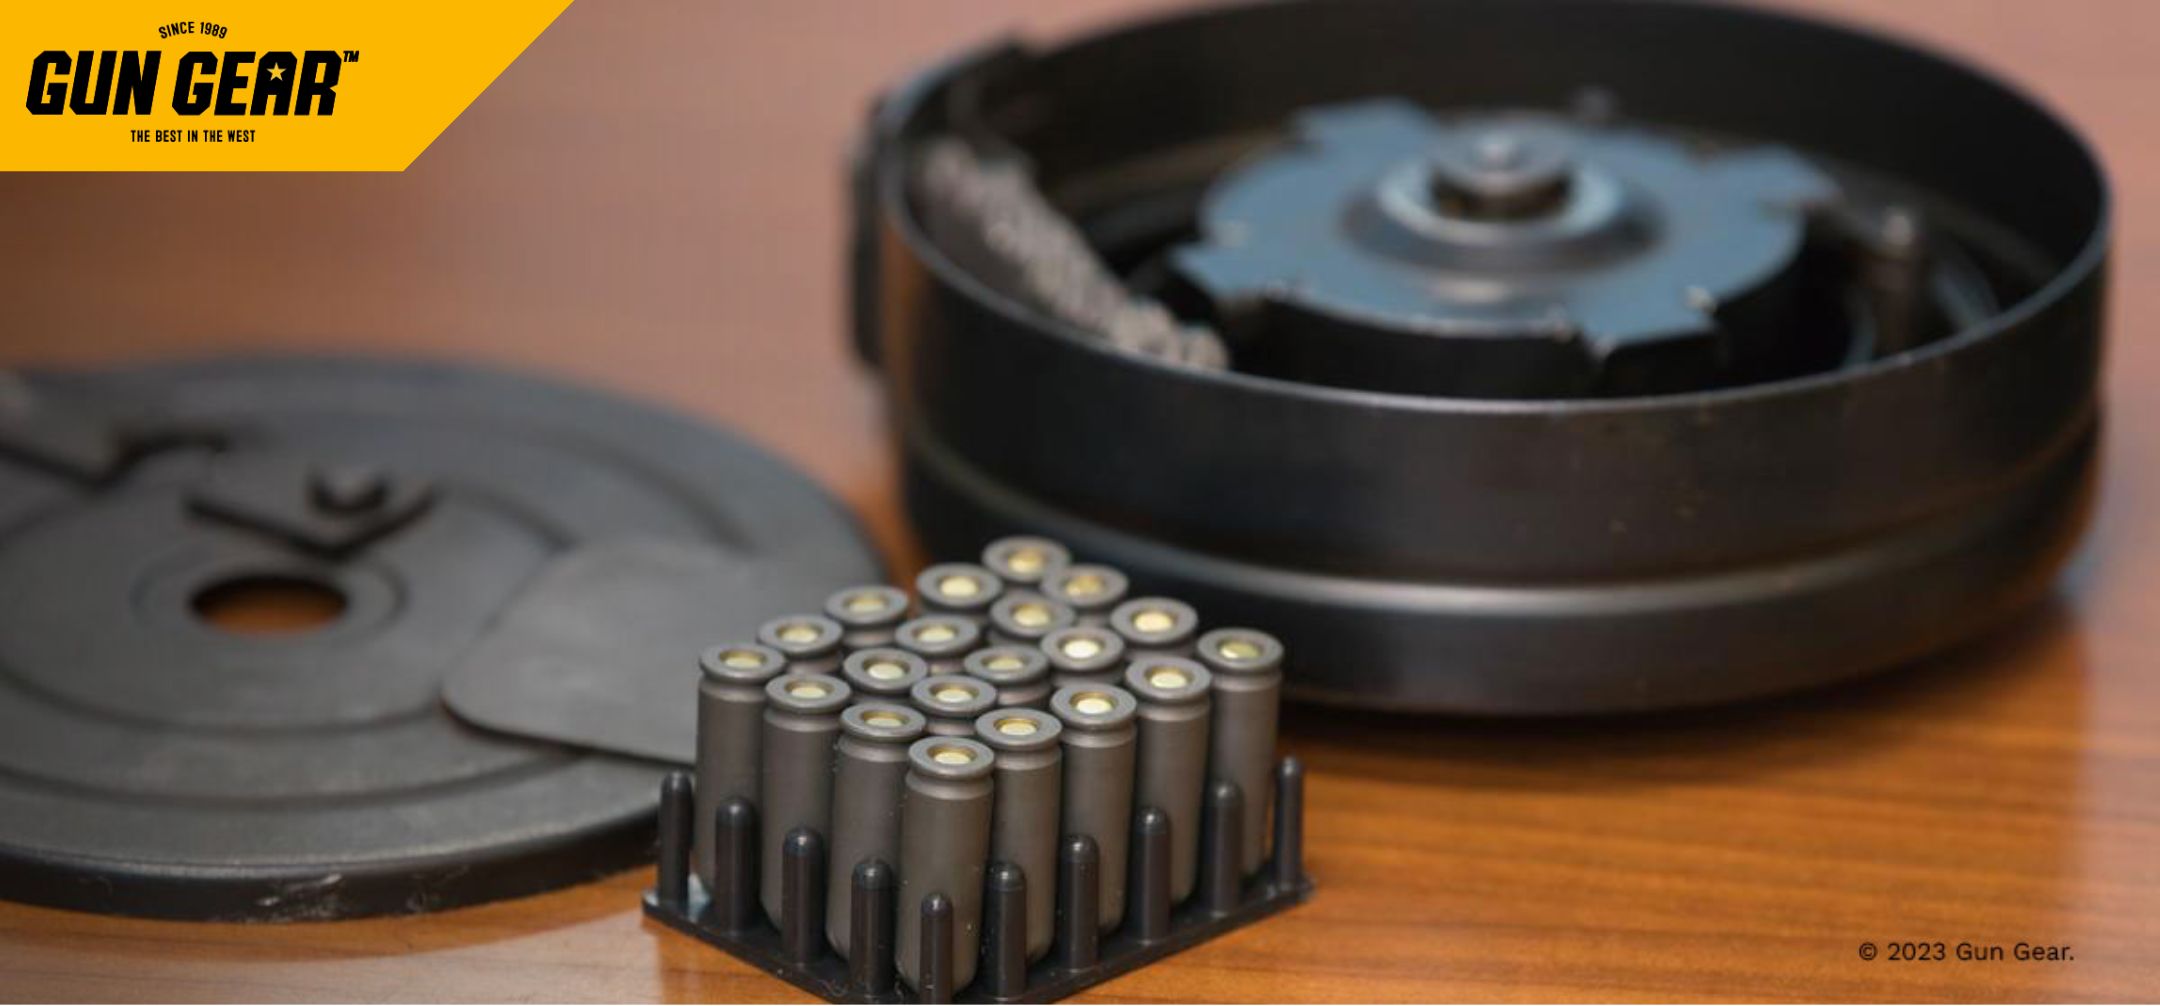 Extended Shooting With Drum Magazines Enhance Your Shooting Experience